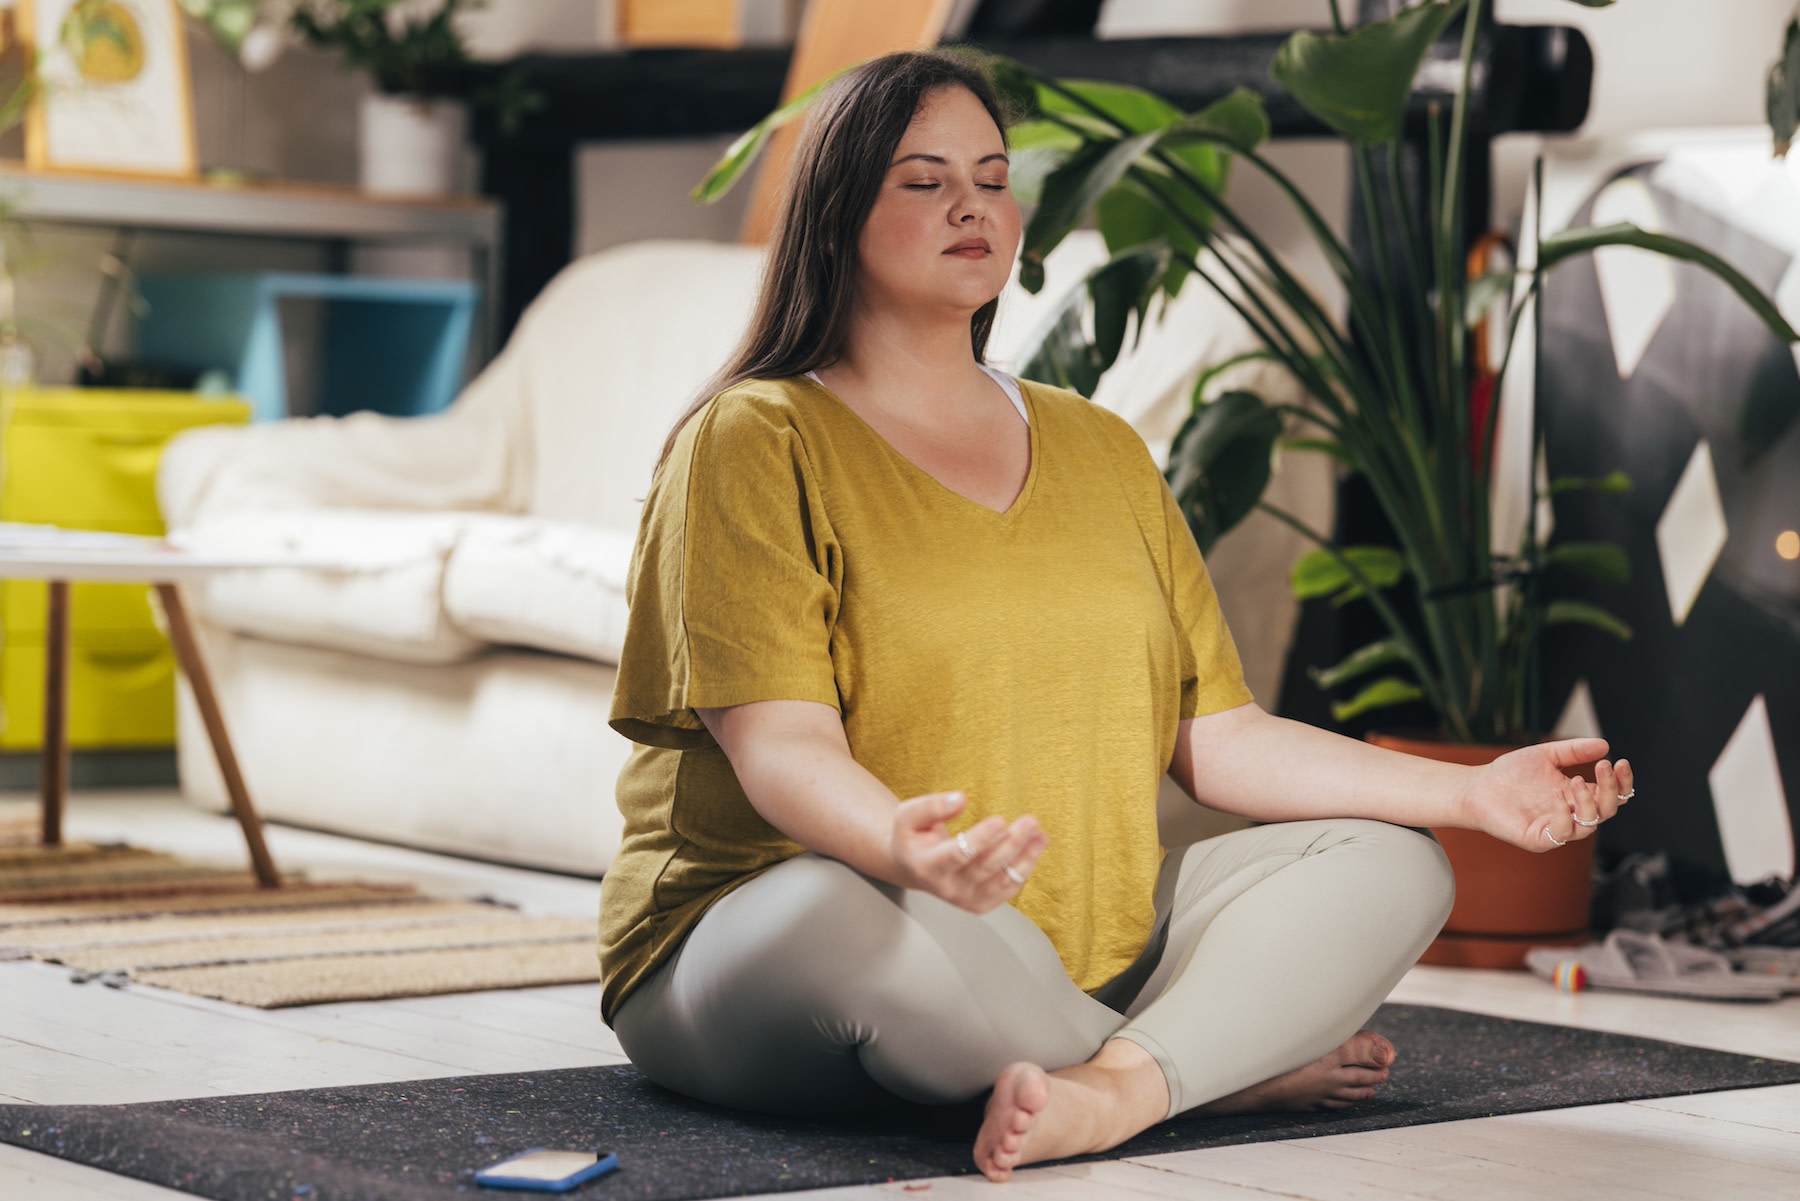 A woman meditating in lotus position, sitting with her eyes closed on a yoga mat at home. Learn about the benefits of meditating before or after a workout in this article.